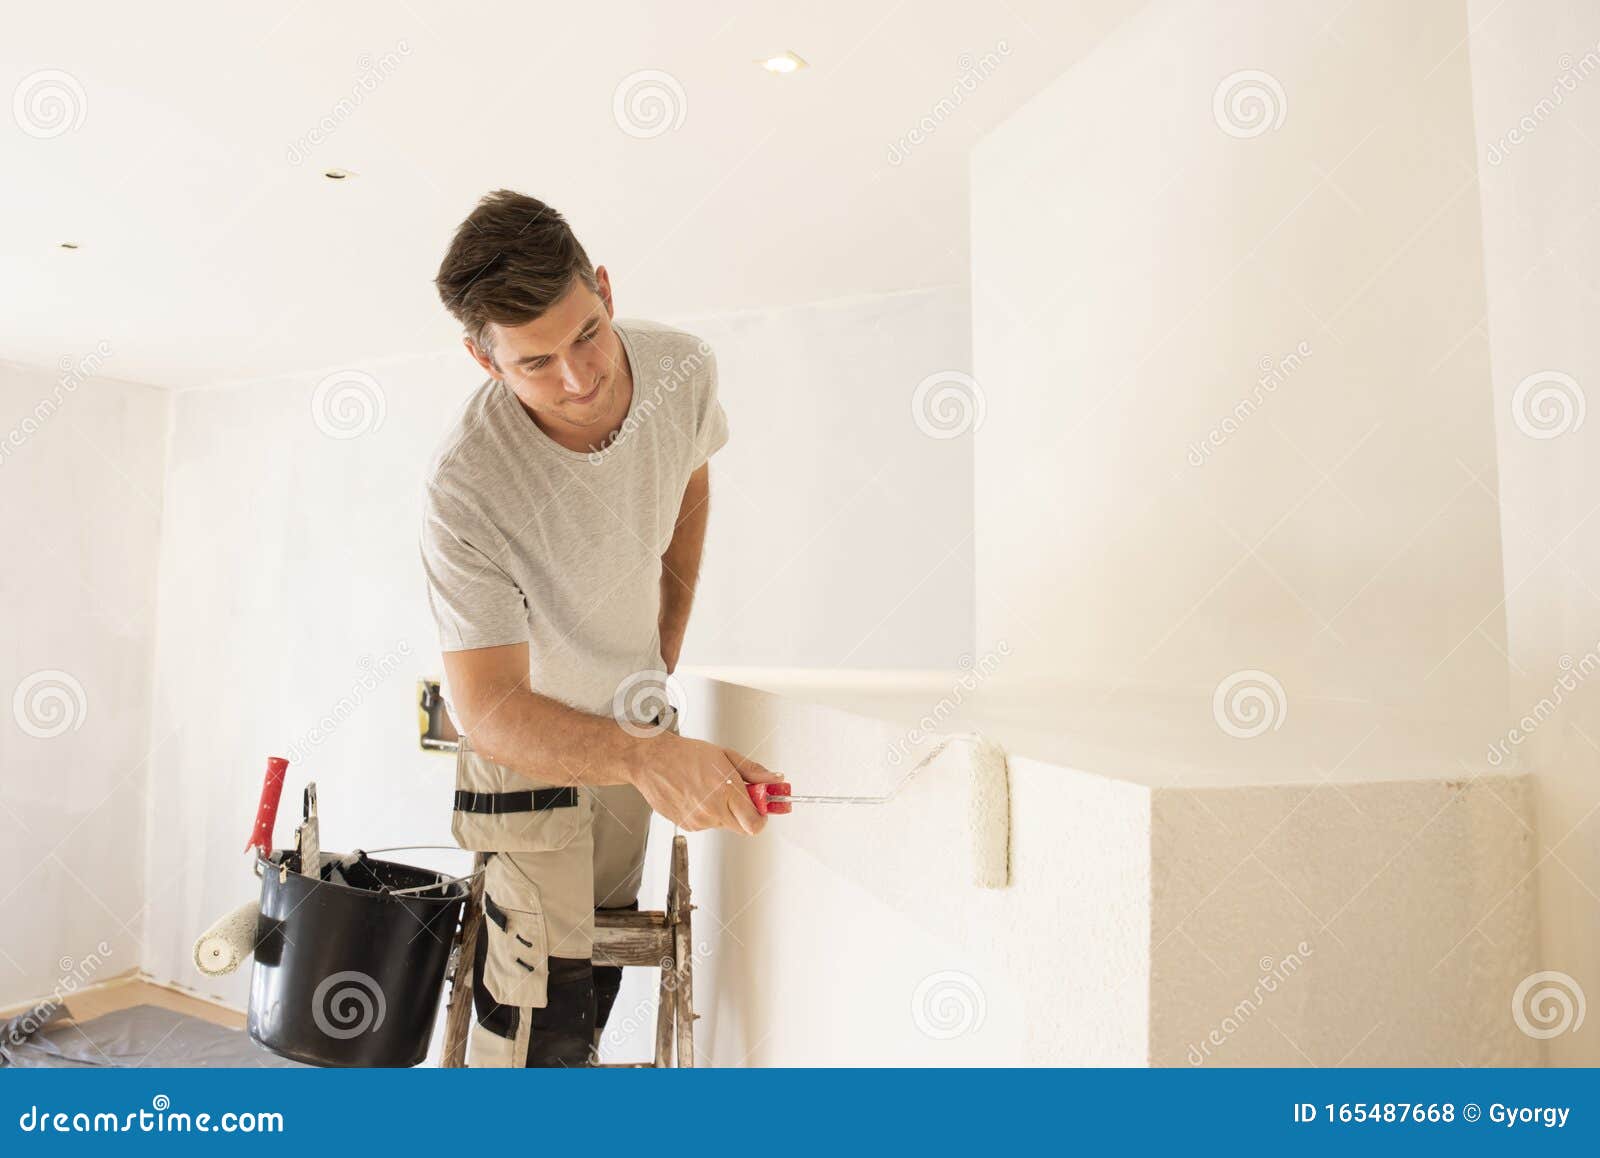 shot of professional contractor painter refurbishing the apartment